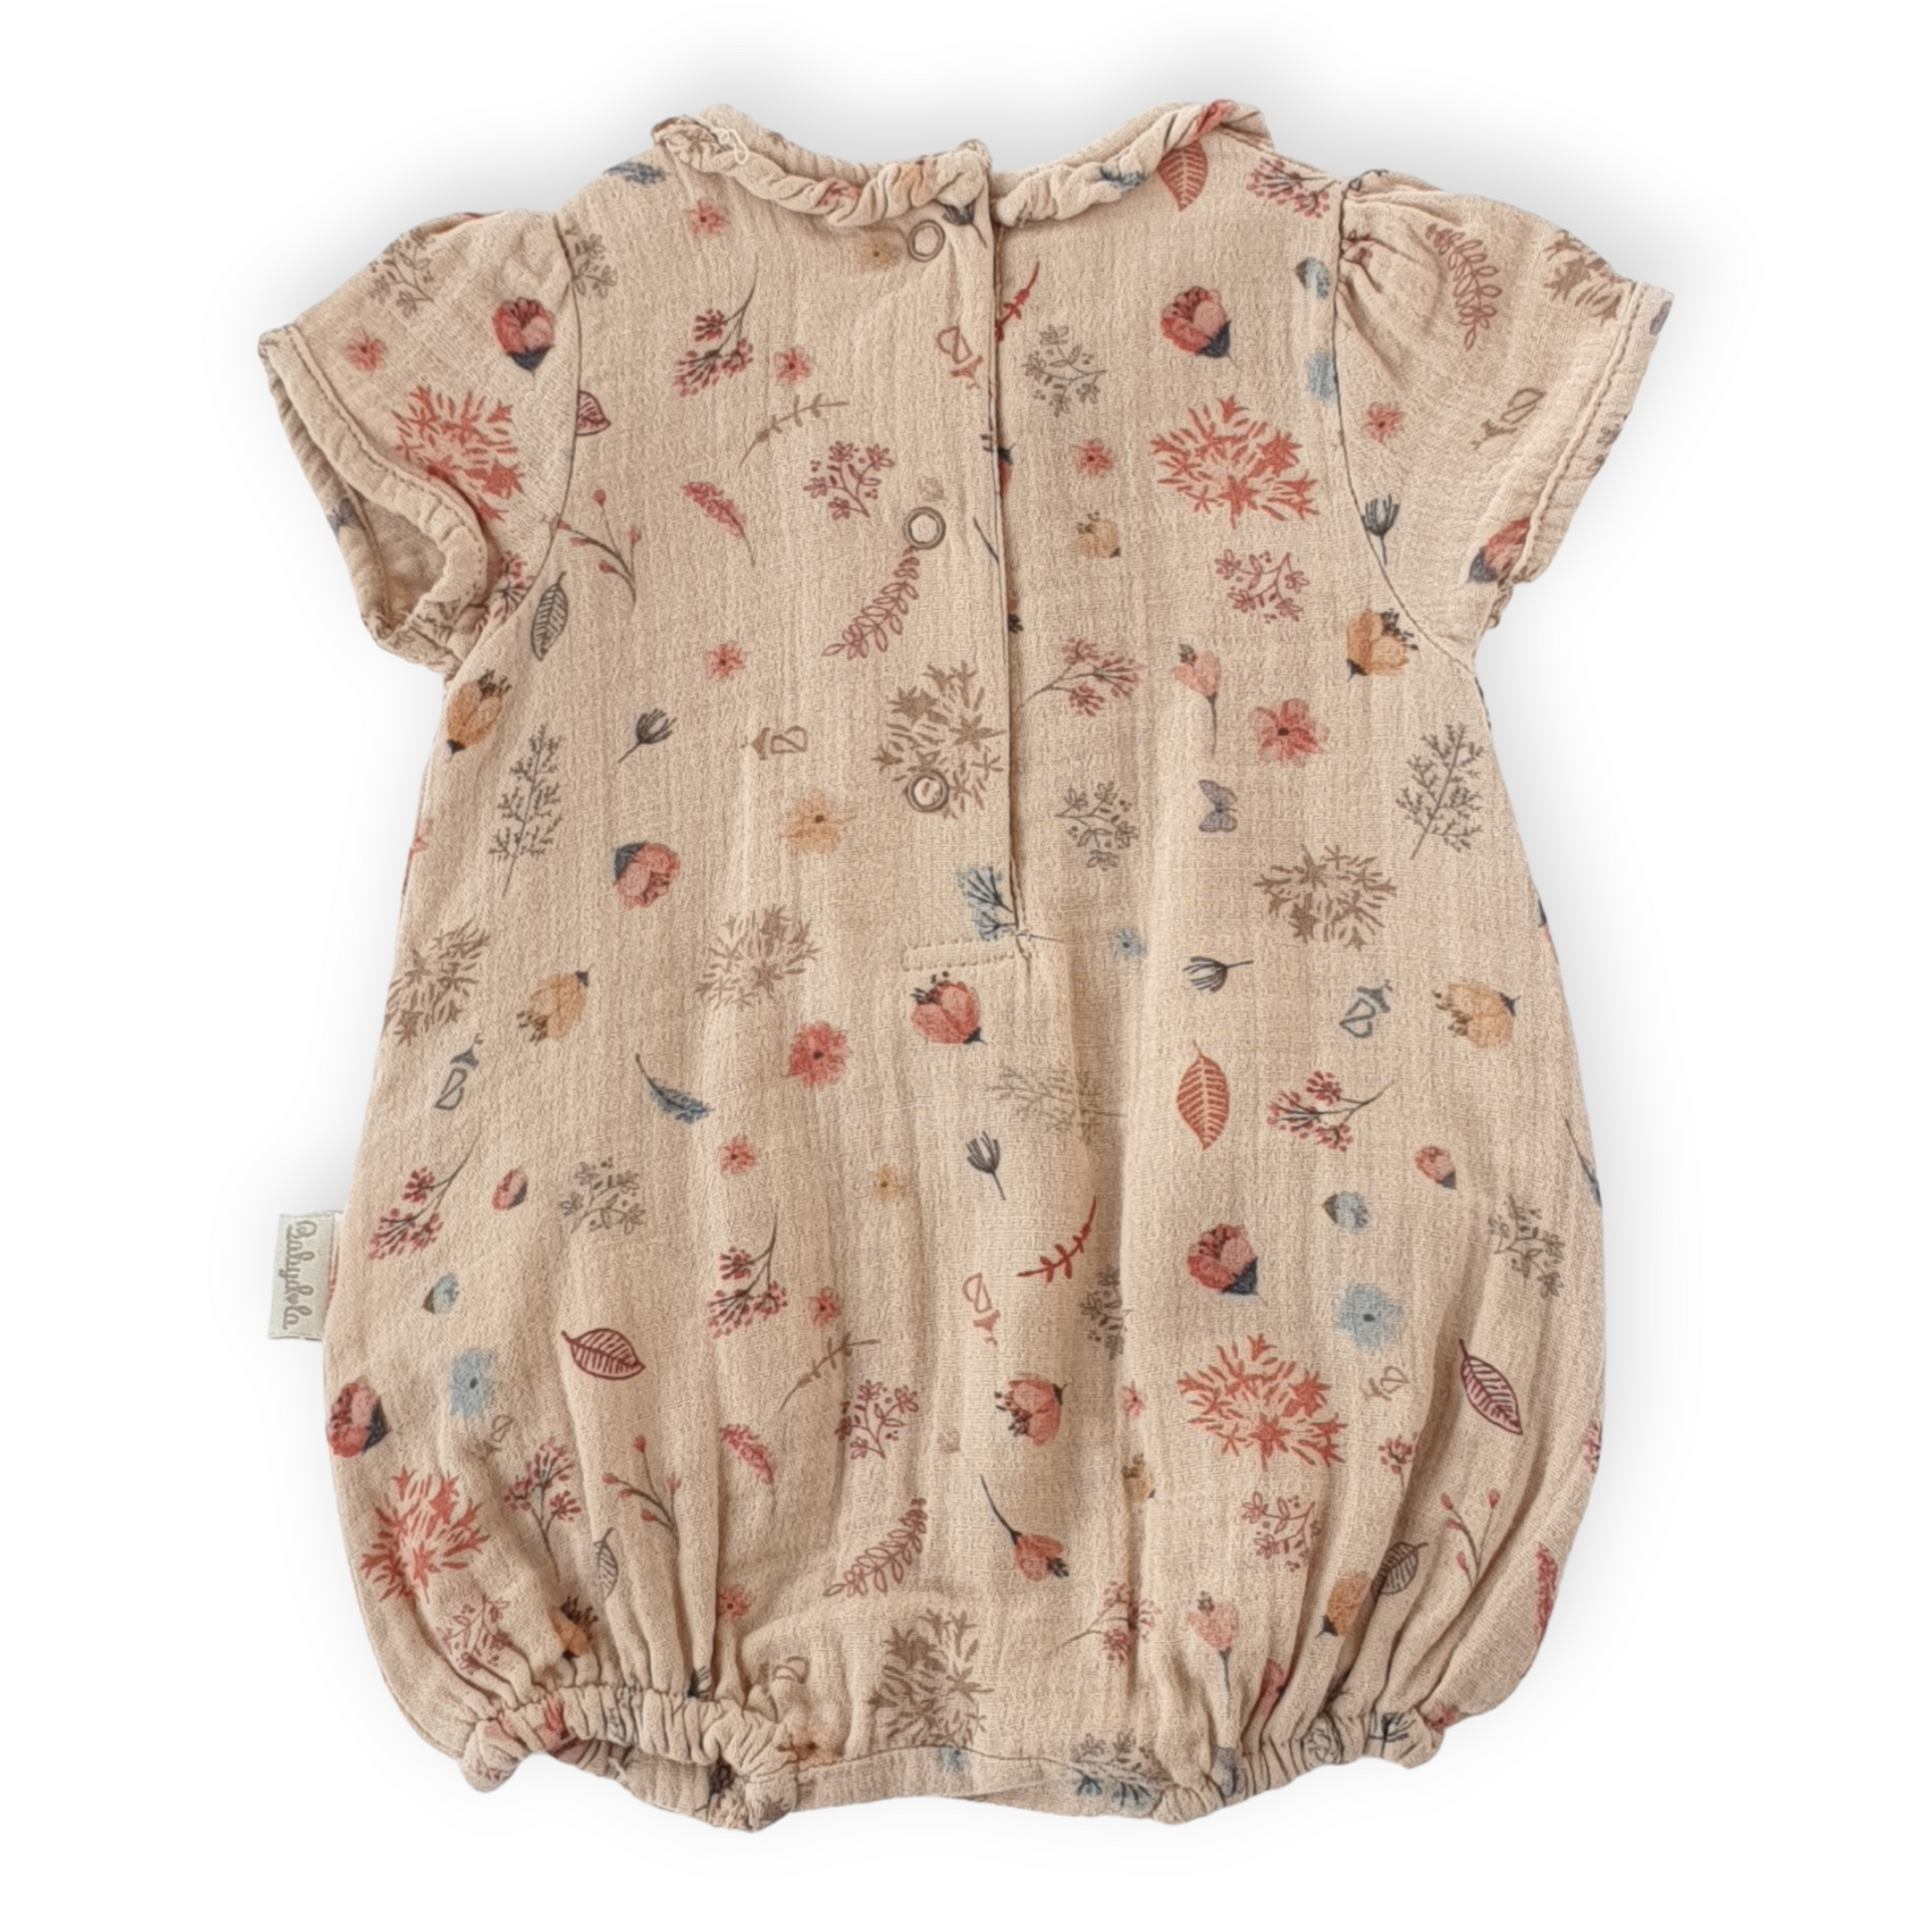 Flowers and Leaves Beige Baby Girl Romper With Pockets-Beige, Catgirl, Catromper, Flowers, Girl, Leaves, Romper, Short sleeve, SS23-Babydola-[Too Twee]-[Tootwee]-[baby]-[newborn]-[clothes]-[essentials]-[toys]-[Lebanon]